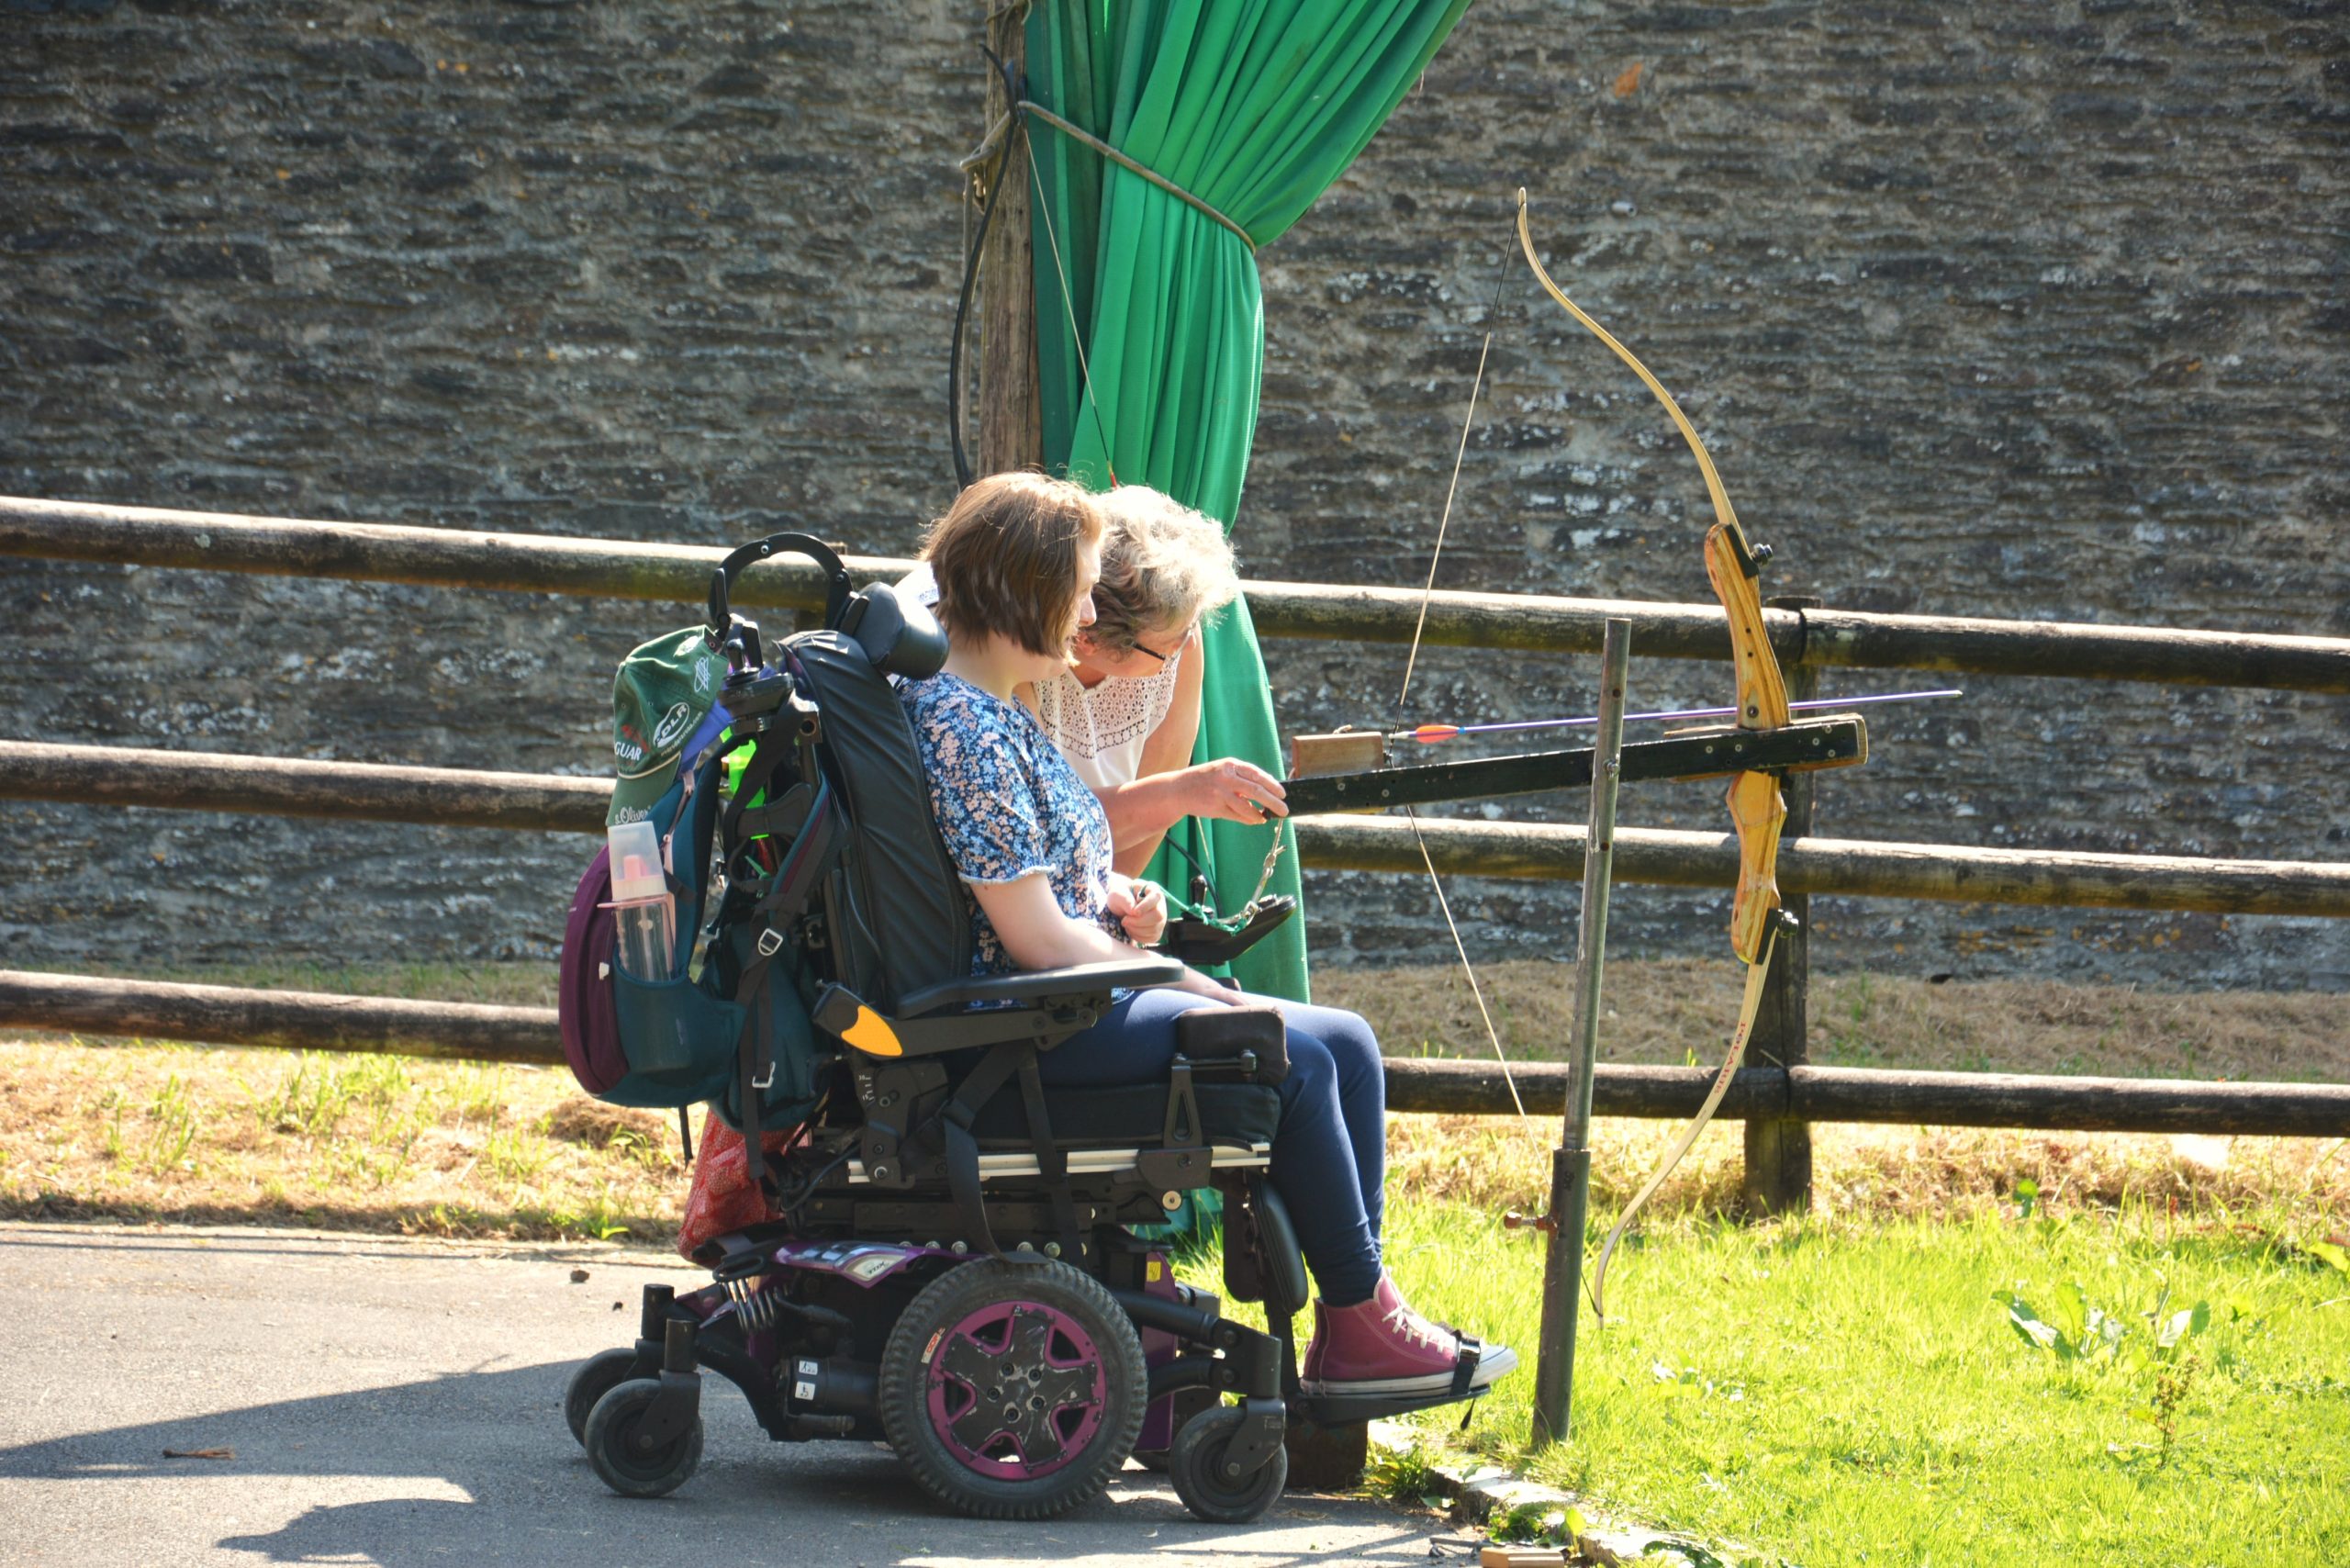 A guest in a wheelchair is looking to the side, with another guest leaning down to help them use the accessible trigger bow. The bow is loaded and ready to fire, pointing to the right.